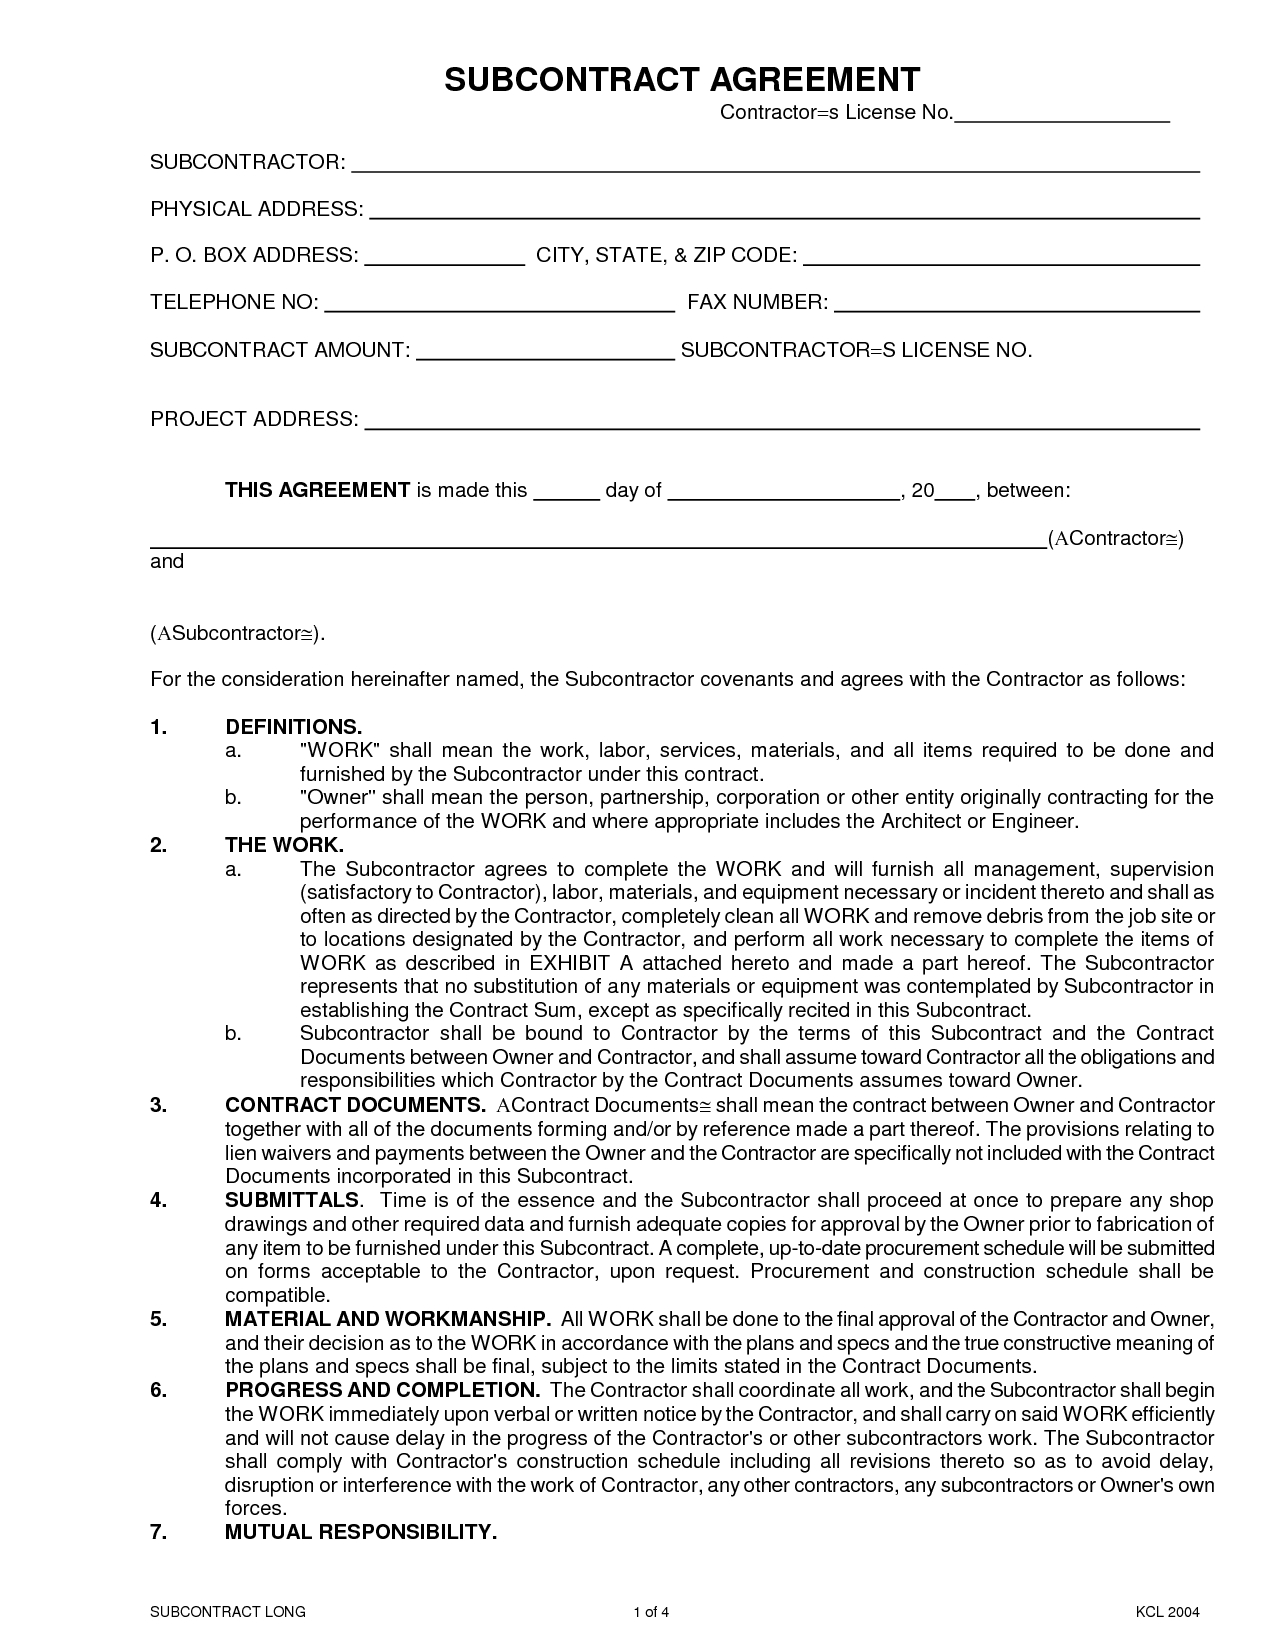 Subcontractor Agreement - Place Today&amp;#039;s Date At The Peak Of The - Free Printable Subcontractor Agreement